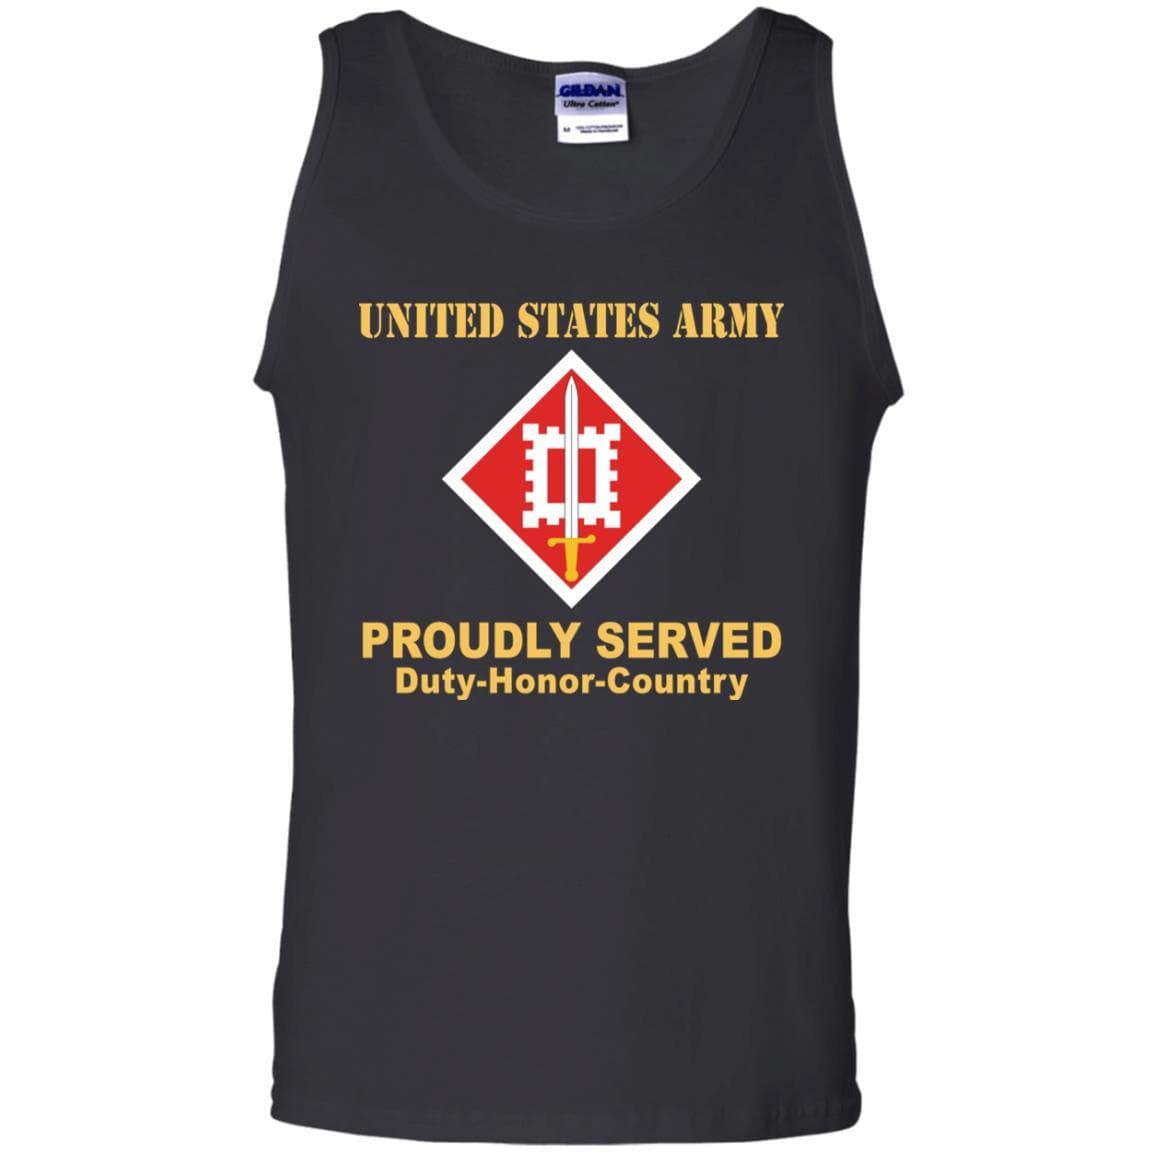 US ARMY 18TH ENGINEER BRIGADE- Proudly Served T-Shirt On Front For Men-TShirt-Army-Veterans Nation